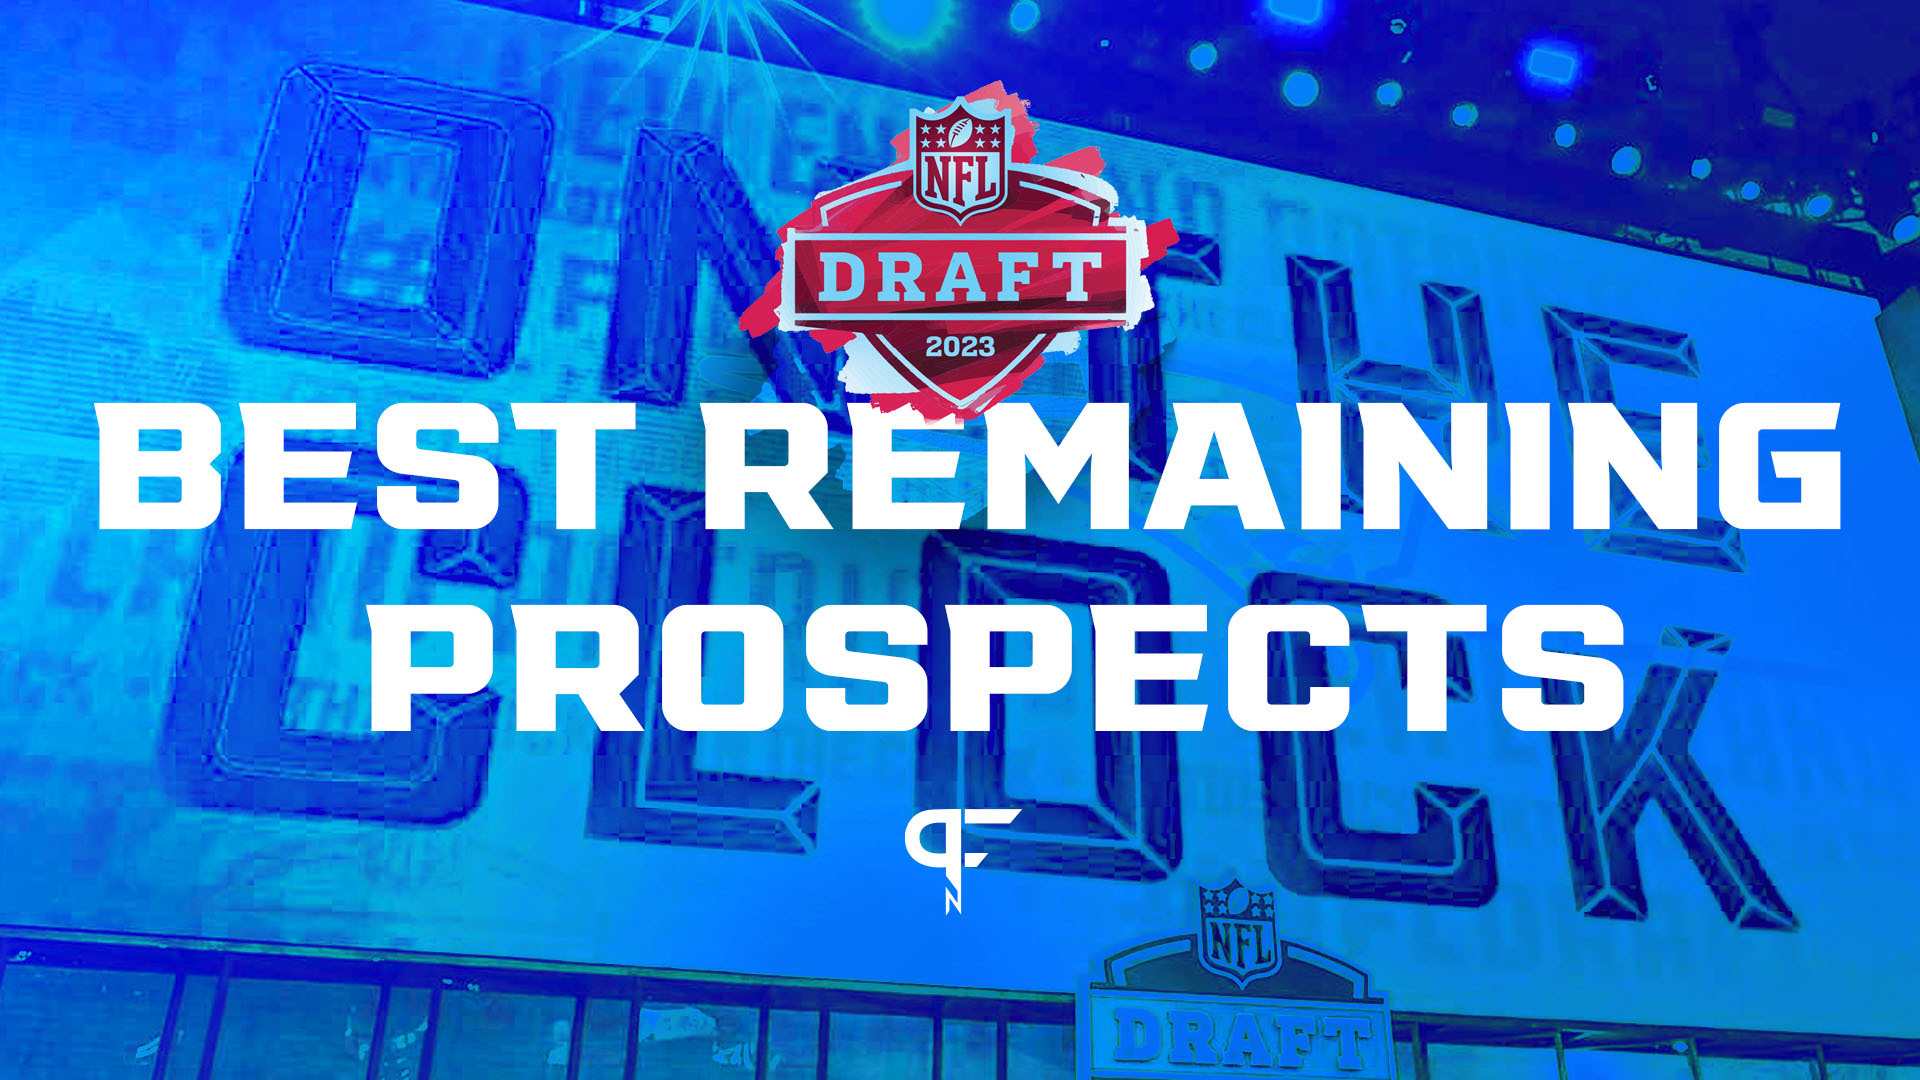 2022 NFL Draft: Date, time, location, top prospects and more